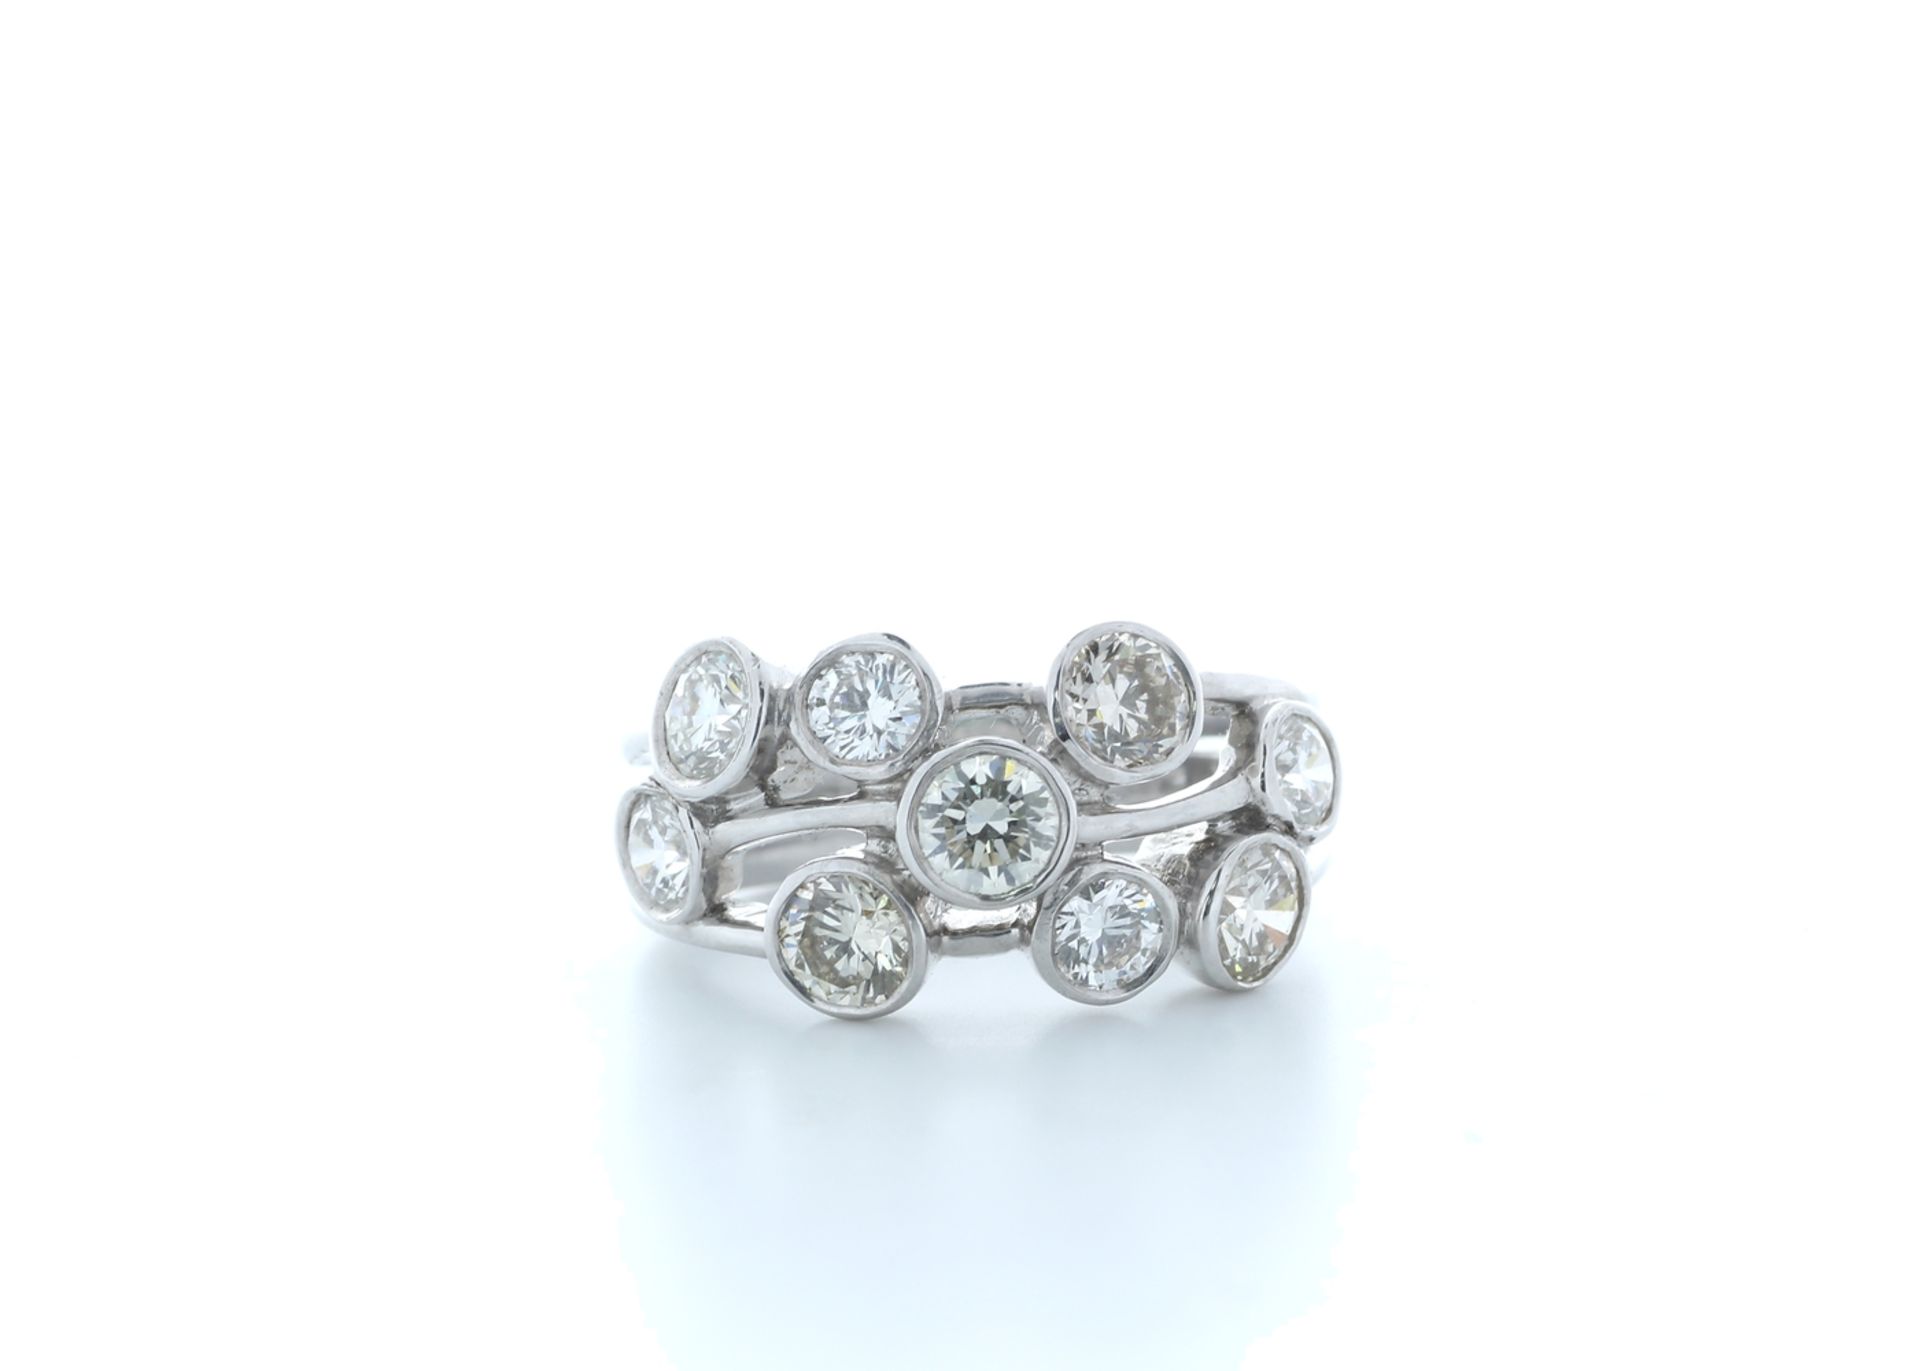 18ct White Gold Claw Set Semi Eternity Diamond Ring 2.16 Carats - Valued by IDI £18,000.00 - 18ct